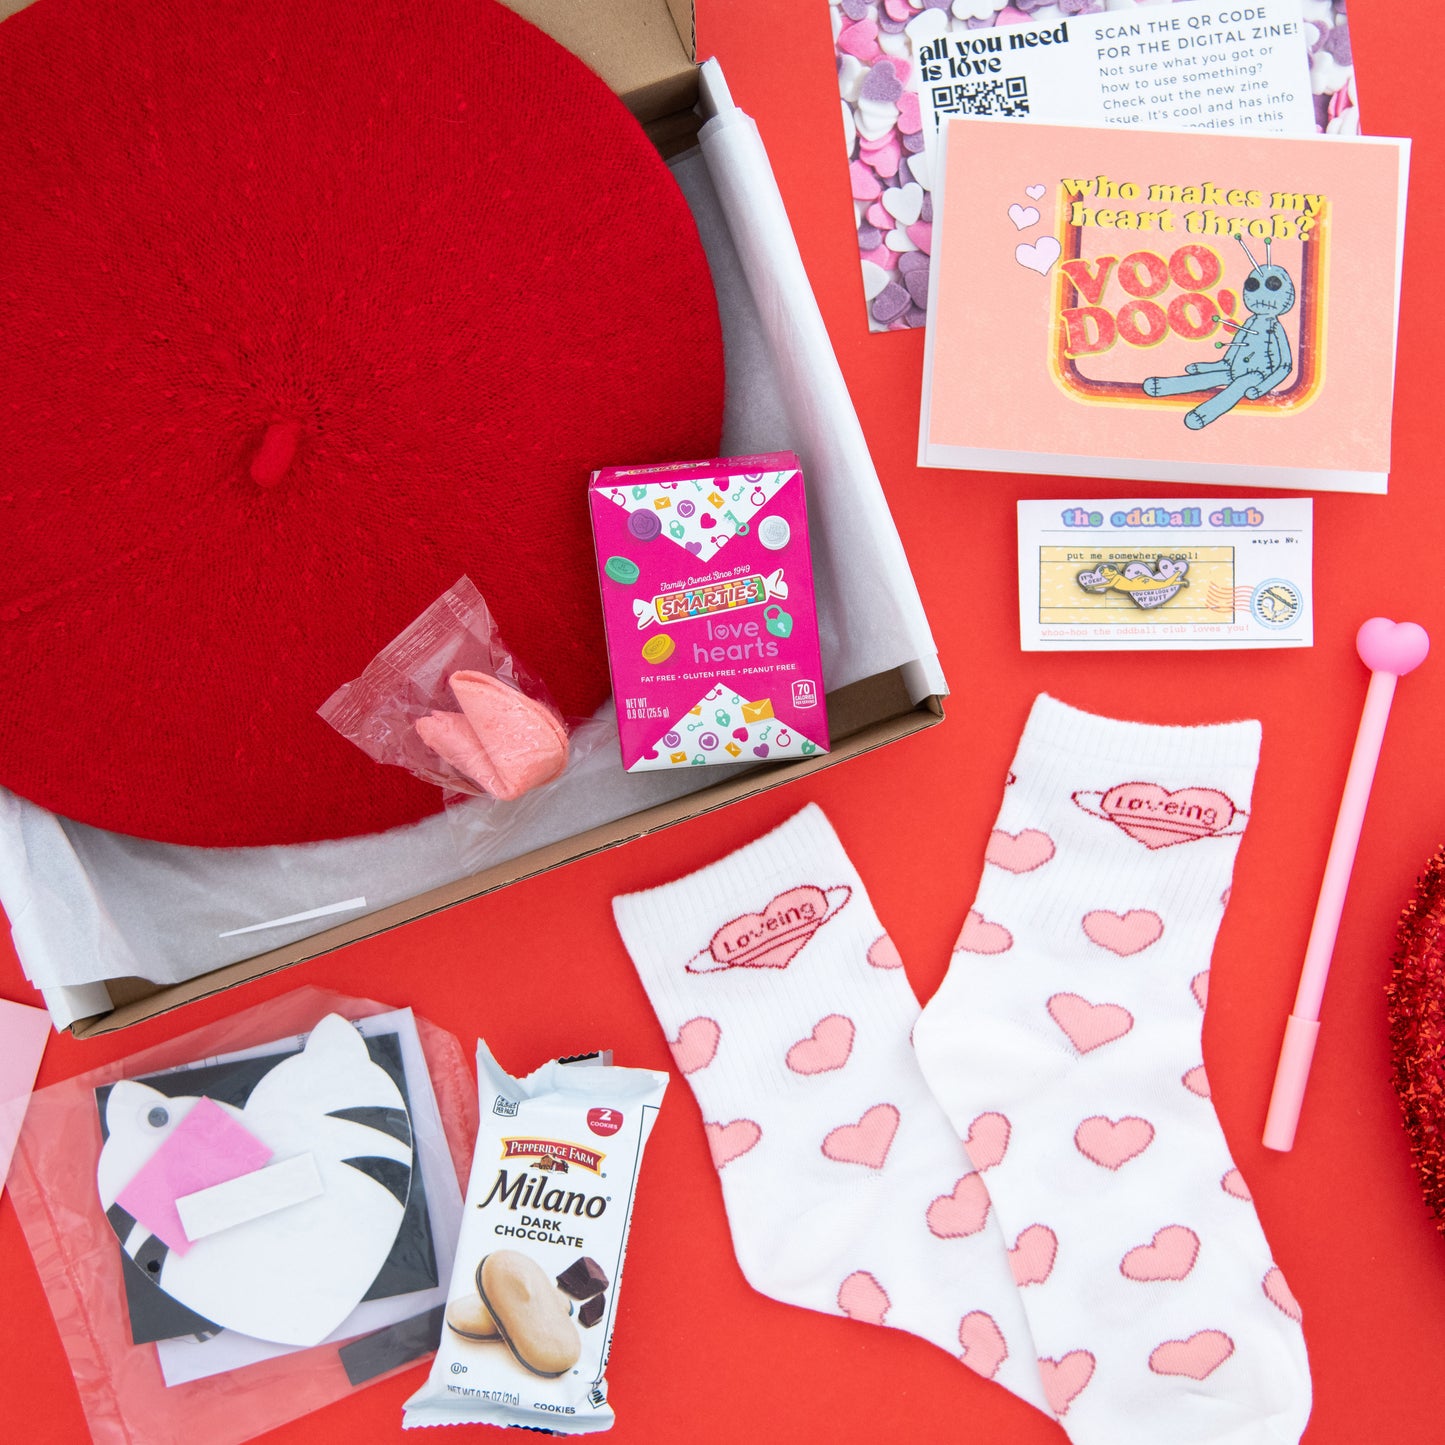 Heart-patterned socks with loving words, Smarties conversation heart candies box, pink fortune cookie, peach voodoo greeting card with a voodoo doll with pins, enamel pin, red French beret, heart pen, and a French beret subscription box